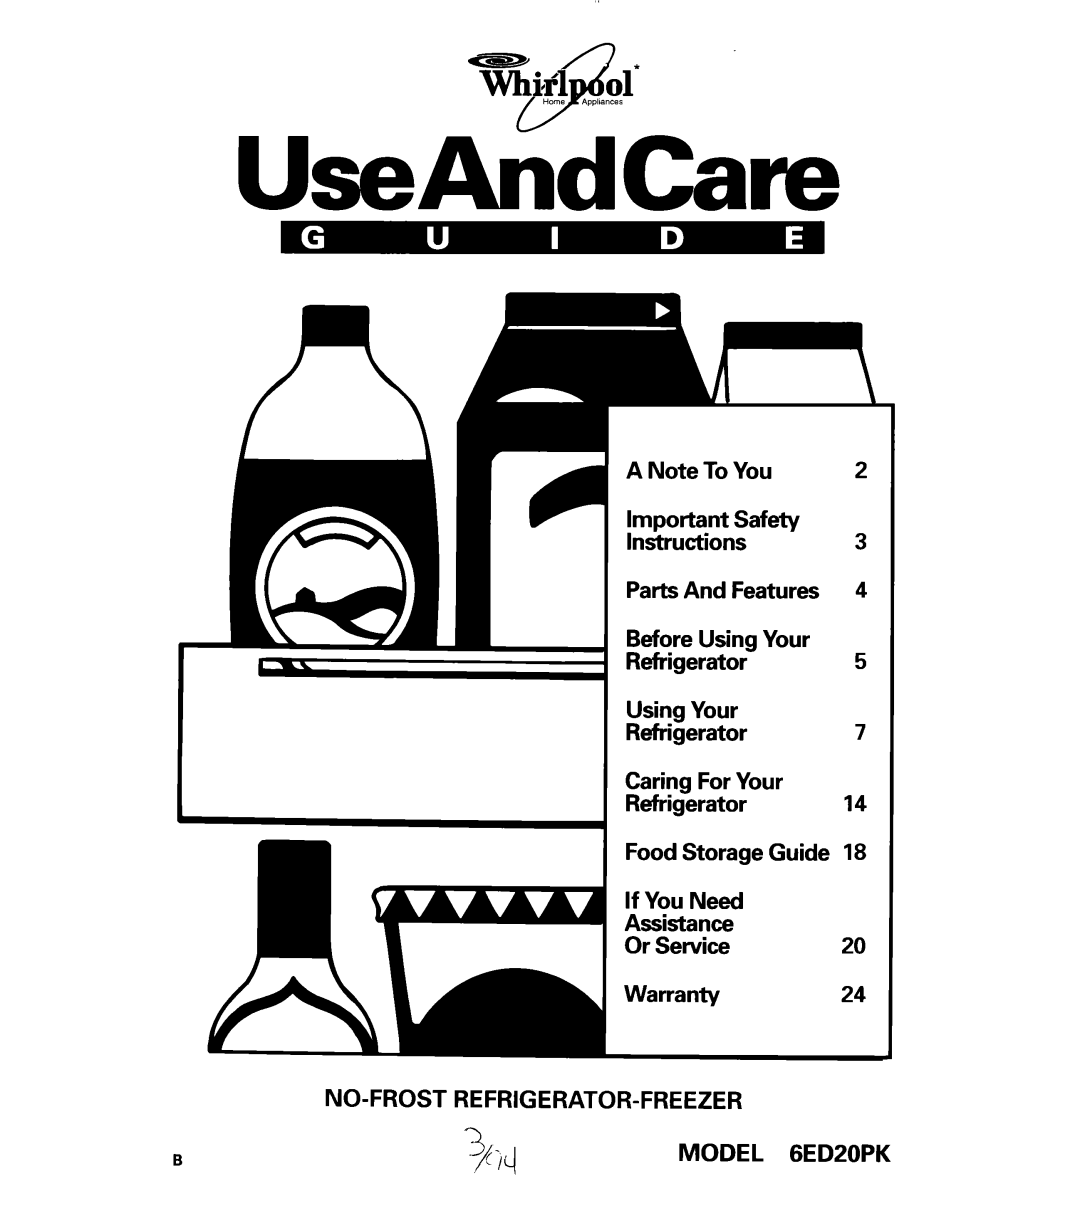 Whirlpool important safety instructions Tbl 01 HomeAppliances, UseAndCare, A Note To You, MODEL 6ED20PK 